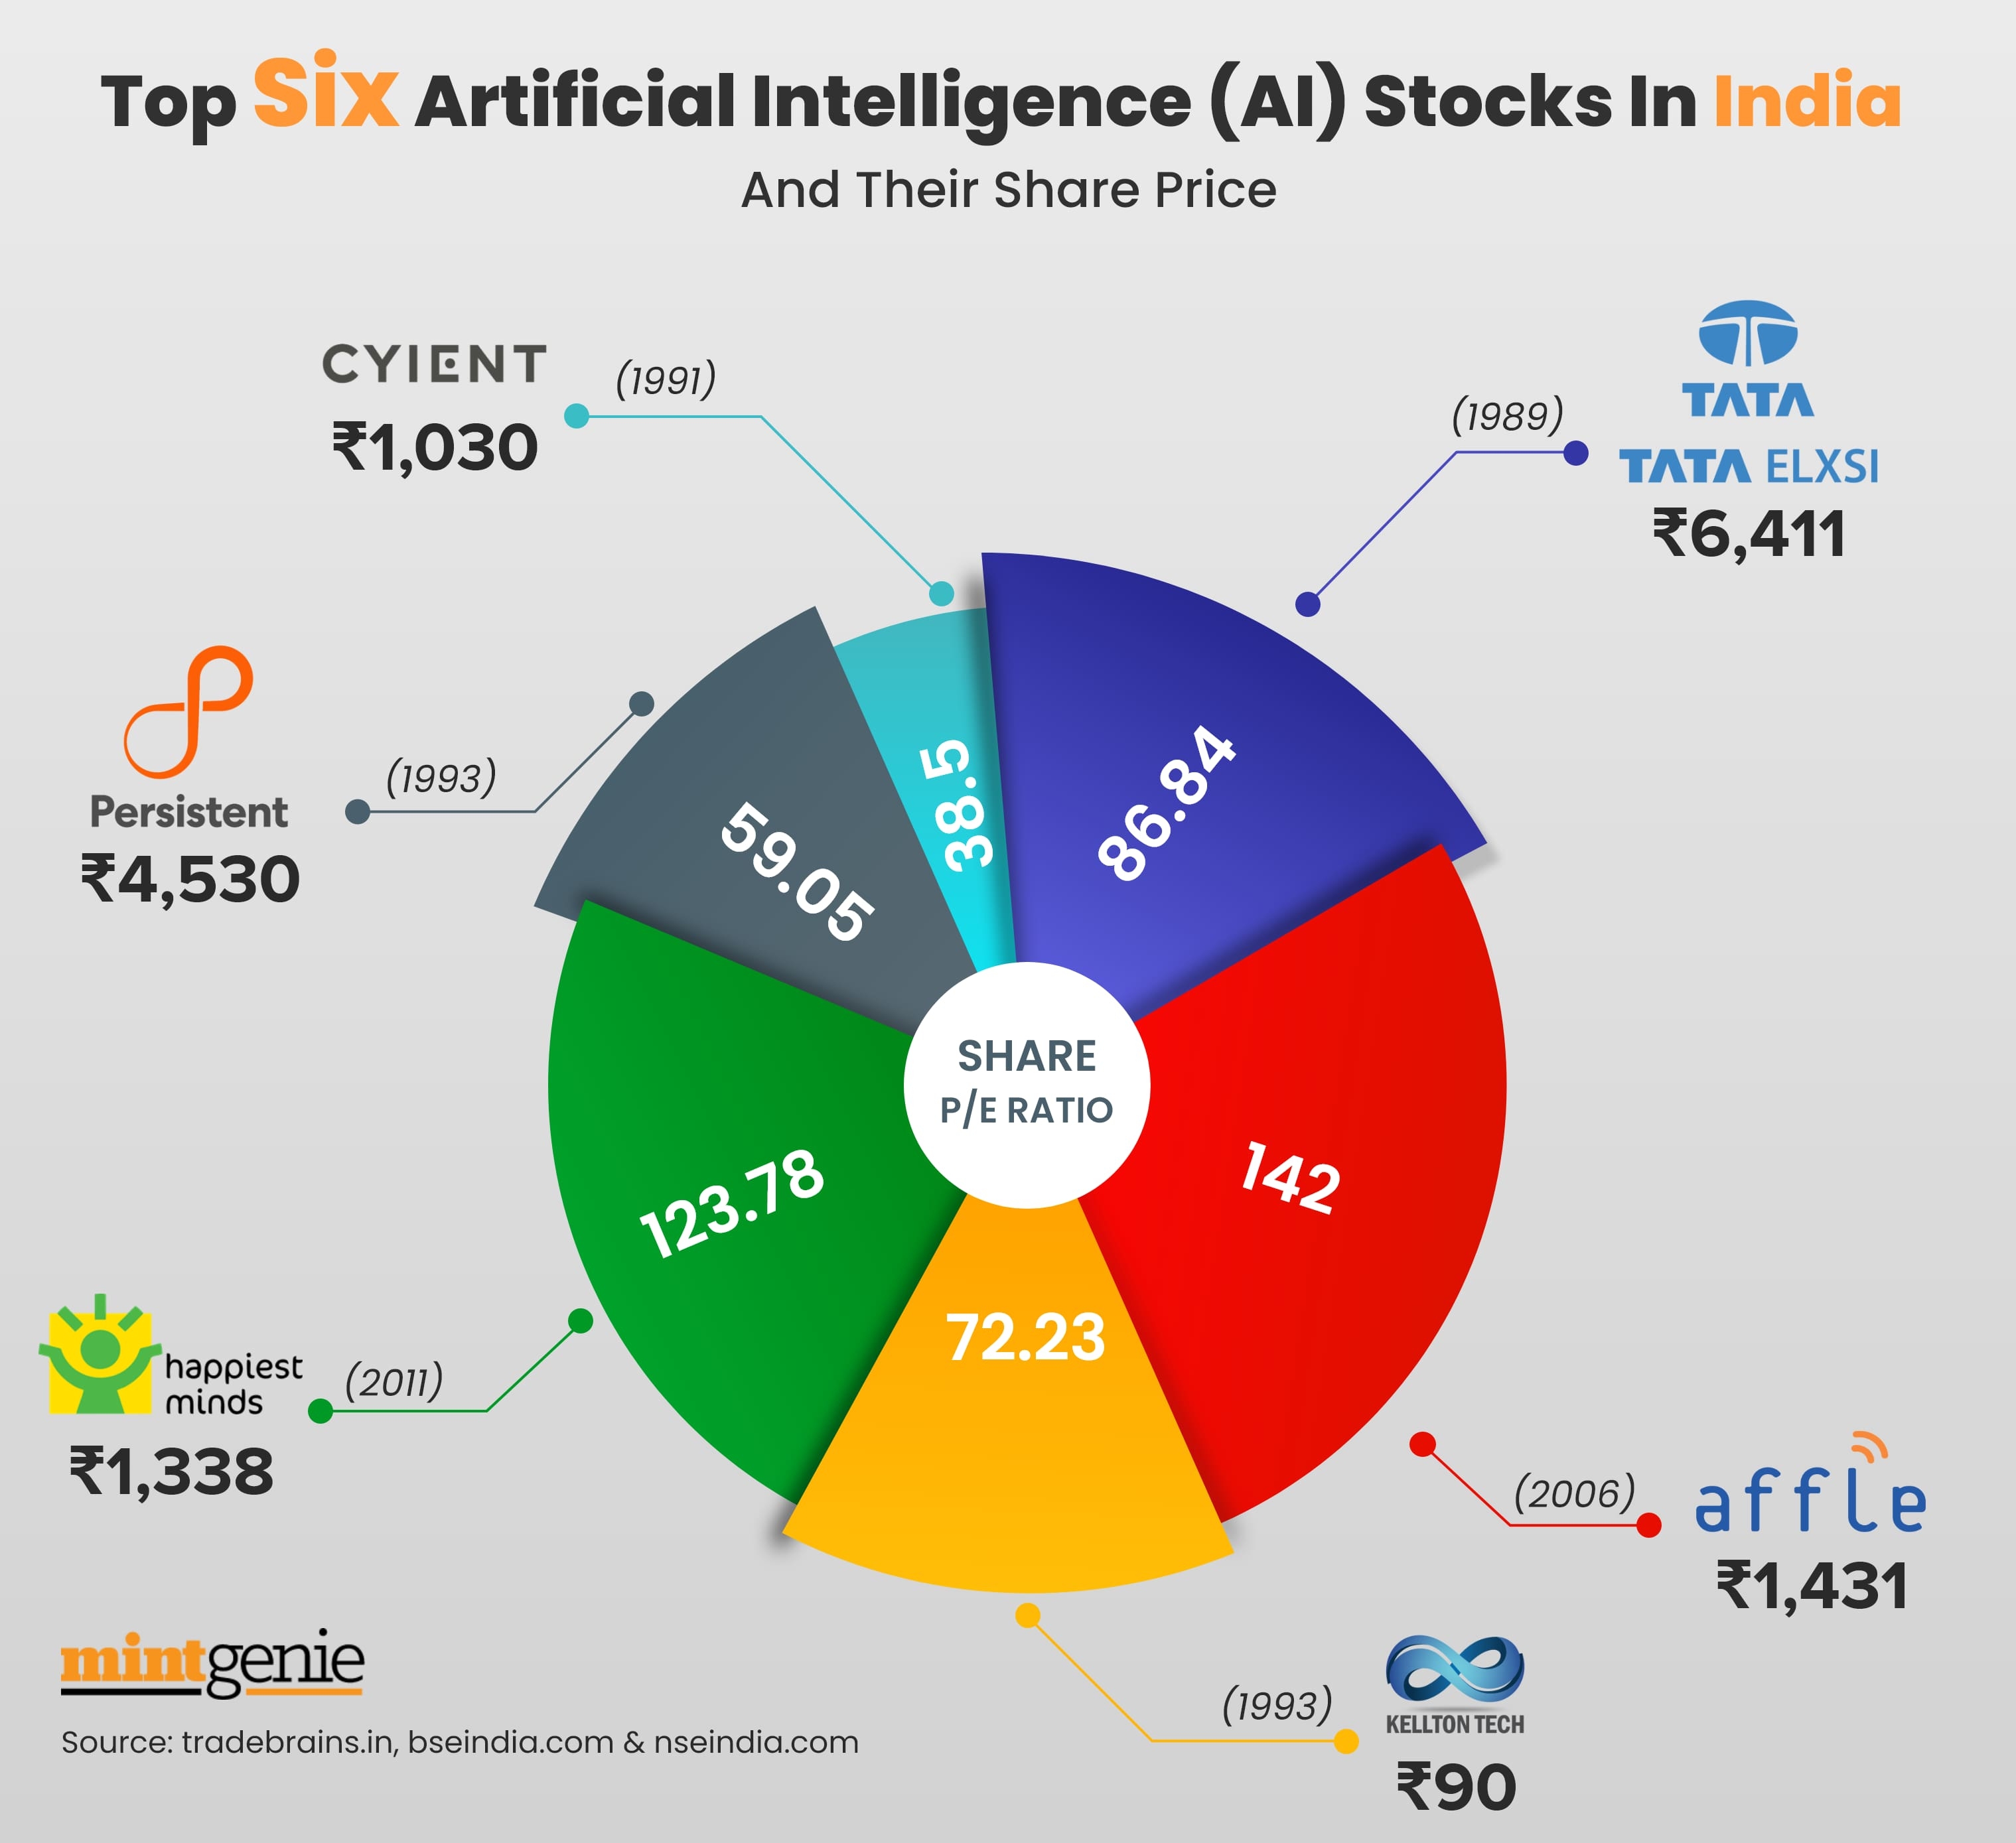 Top six Artificial Intelligence (AI) stocks in India